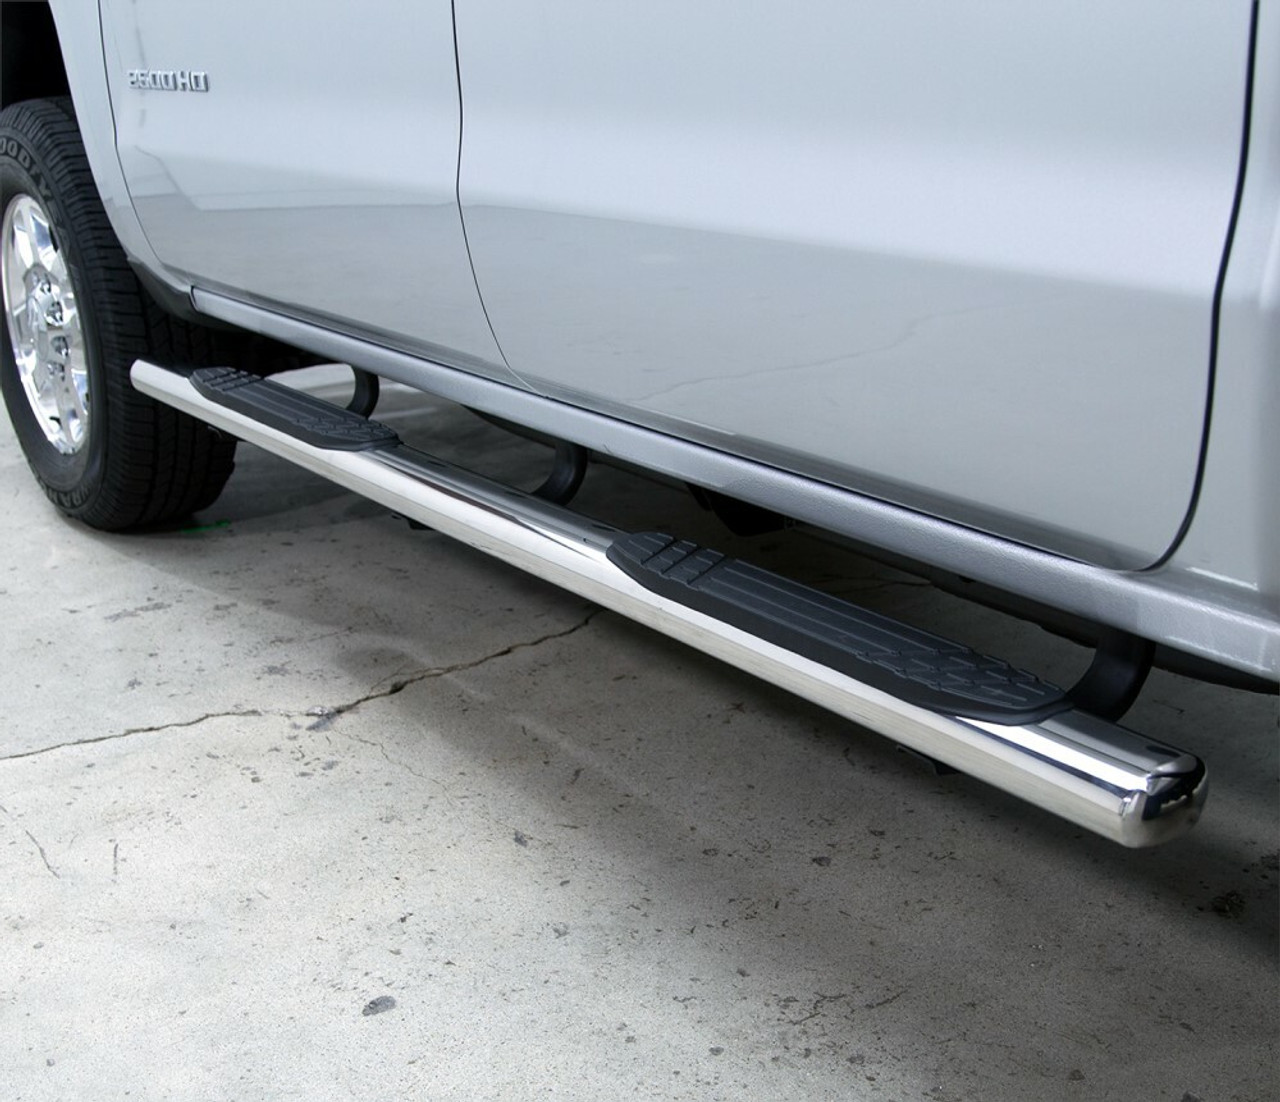 Go Rhino 684404680PS Chevrolet, Silverado 2500HD, 3500HD, 2015 - 2019, 4 inch OE Xtreme - Kit: Stainless steel, Polished, 640080PS side bars + 6840465 OE Xtreme Brackets. 4 inch wide x 80 inch long side bars. Welded end caps.  Gasoline only